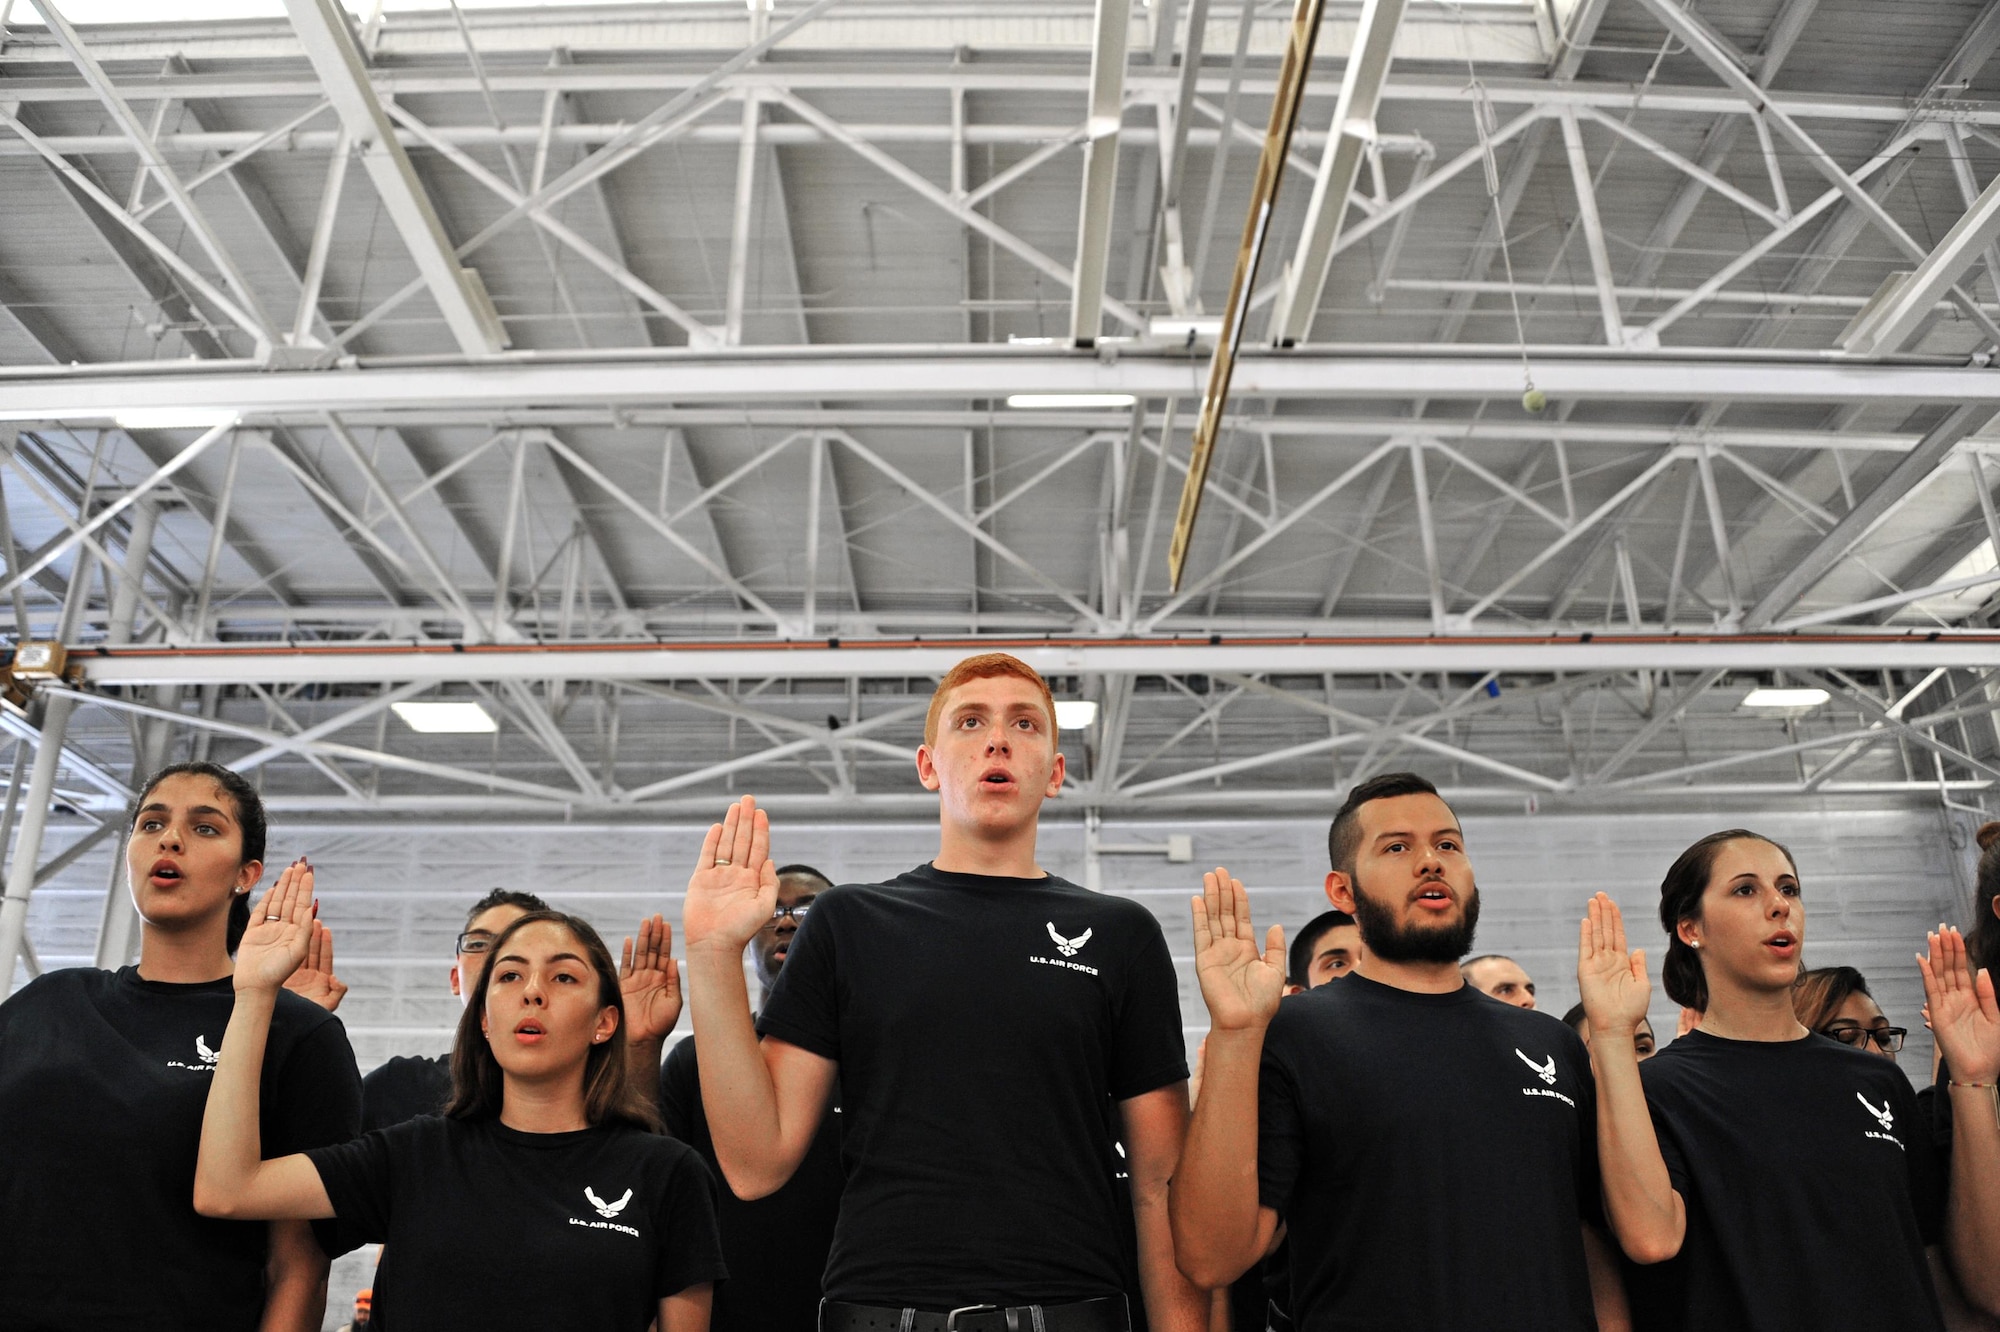 Air Force Delayed Entry Program recruits are sworn in during a U.S. Armed Services swear-in ceremony during the Memorial Day weekend National Salute to America’s Heroes Miami Air and Sea Show at U.S. Coast Guard Air Station Miami in Opa-Locka, Fla., May 26, 2017. Department of Defense service members, DEP family members, and guests witnessed approximately 97 Air Force recruits took the Oath of Enlistment, along with Army, Navy, Marine Corps, and Coast Guard recruits. (U.S. Air Force photo by Senior Airman Erin Trower)